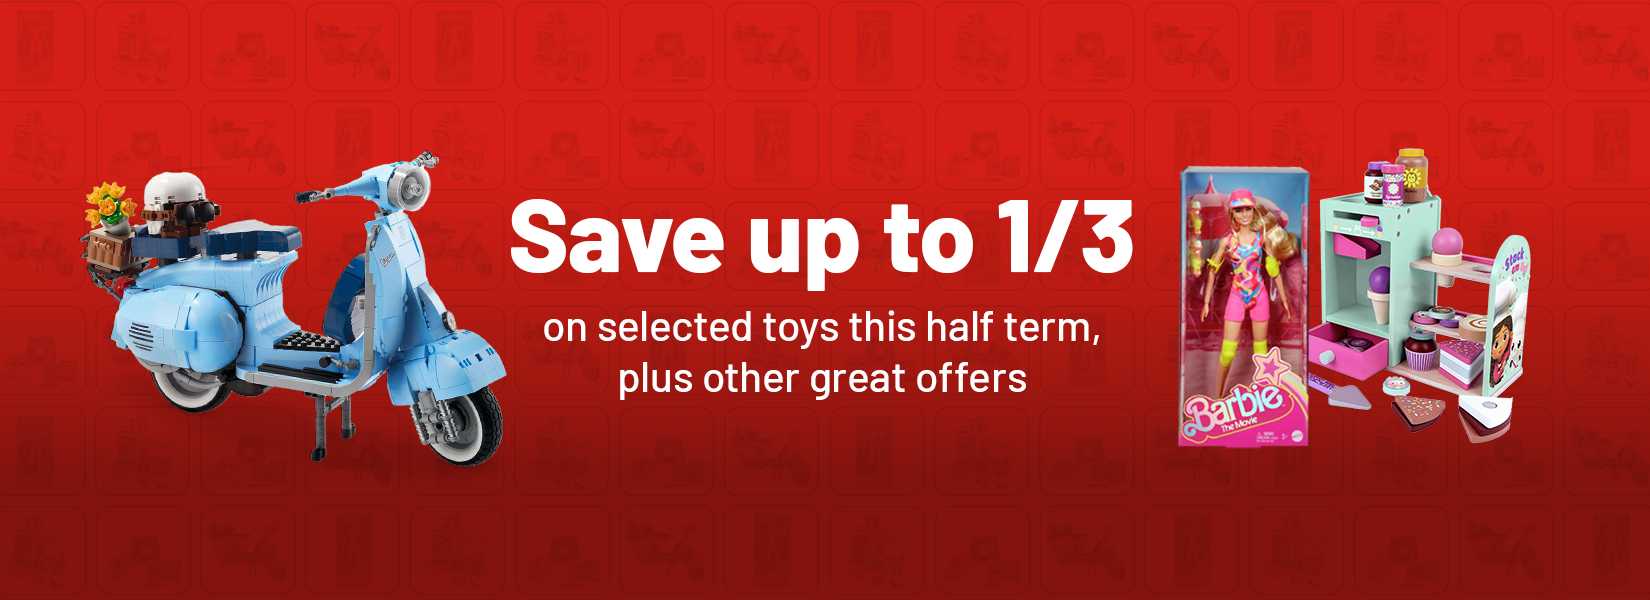 Save up to 1/3 on selected toys this half term, plus other great offers.